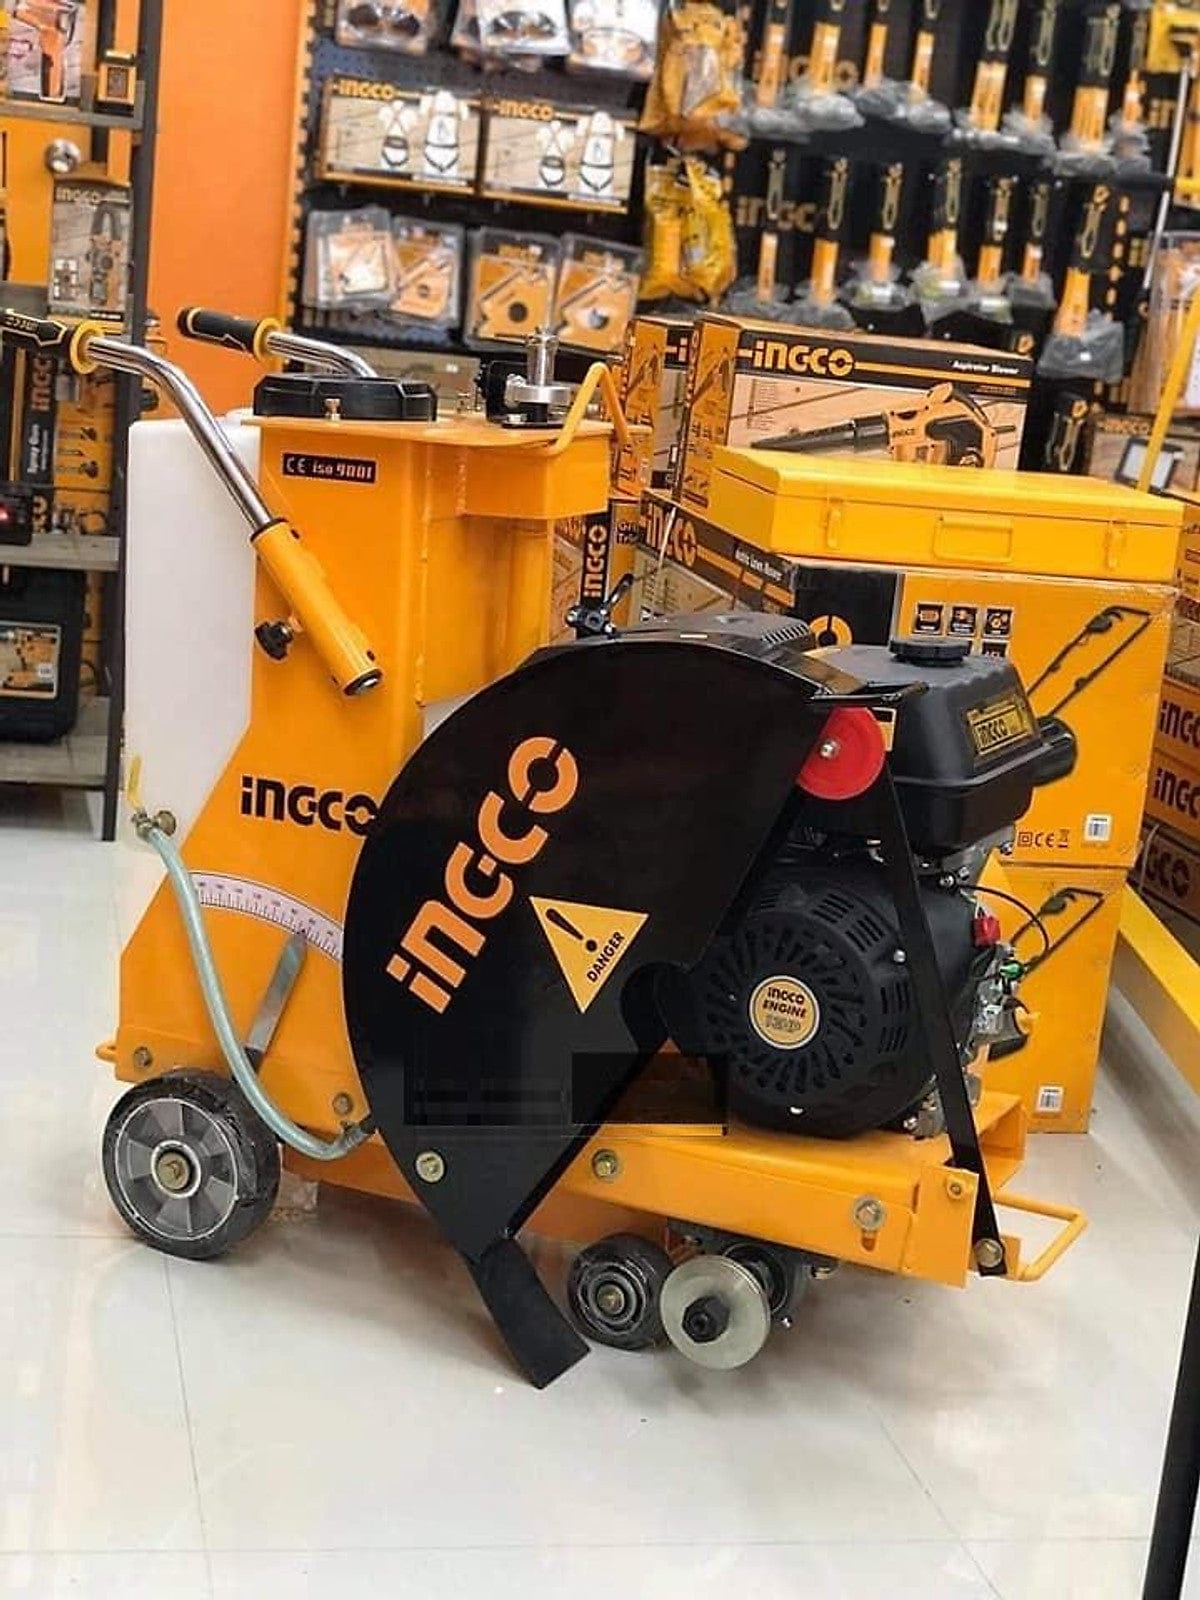 Ingco Gasoline Floor saw 9.6 KW - GSF16-2 | Supply Master | Accra, Ghana Construction Equipment Buy Tools hardware Building materials